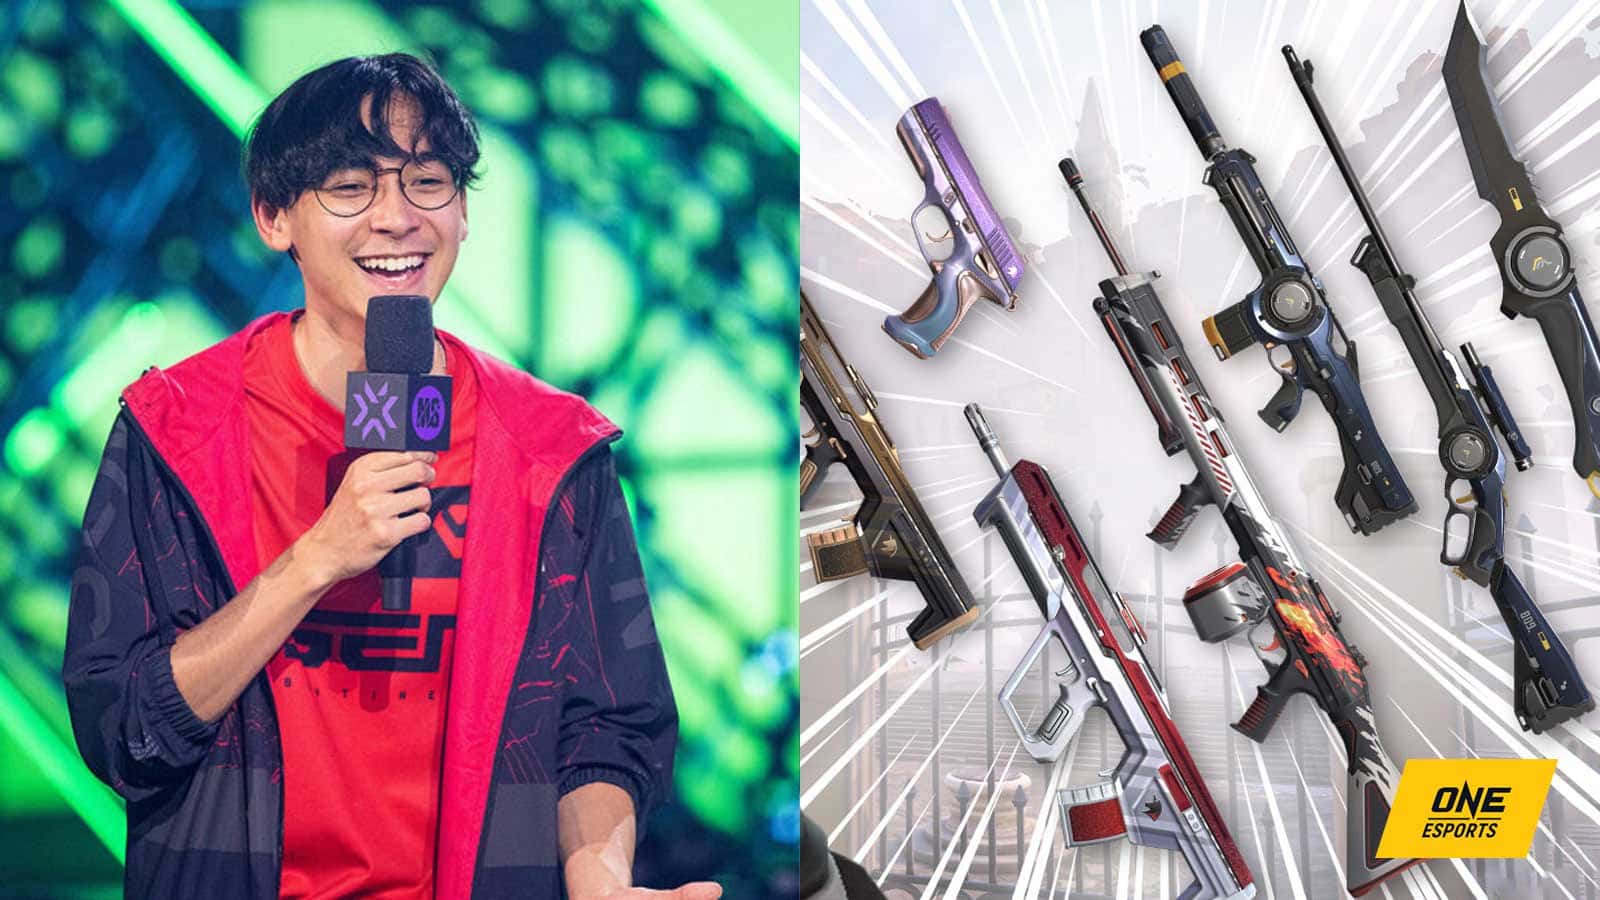 Shiina - Valorant News & Leaks on X: VALORANT x Prime Gaming just got  announced. The partnership will give  Prime users free weapon skins  for VALORANT.  / X